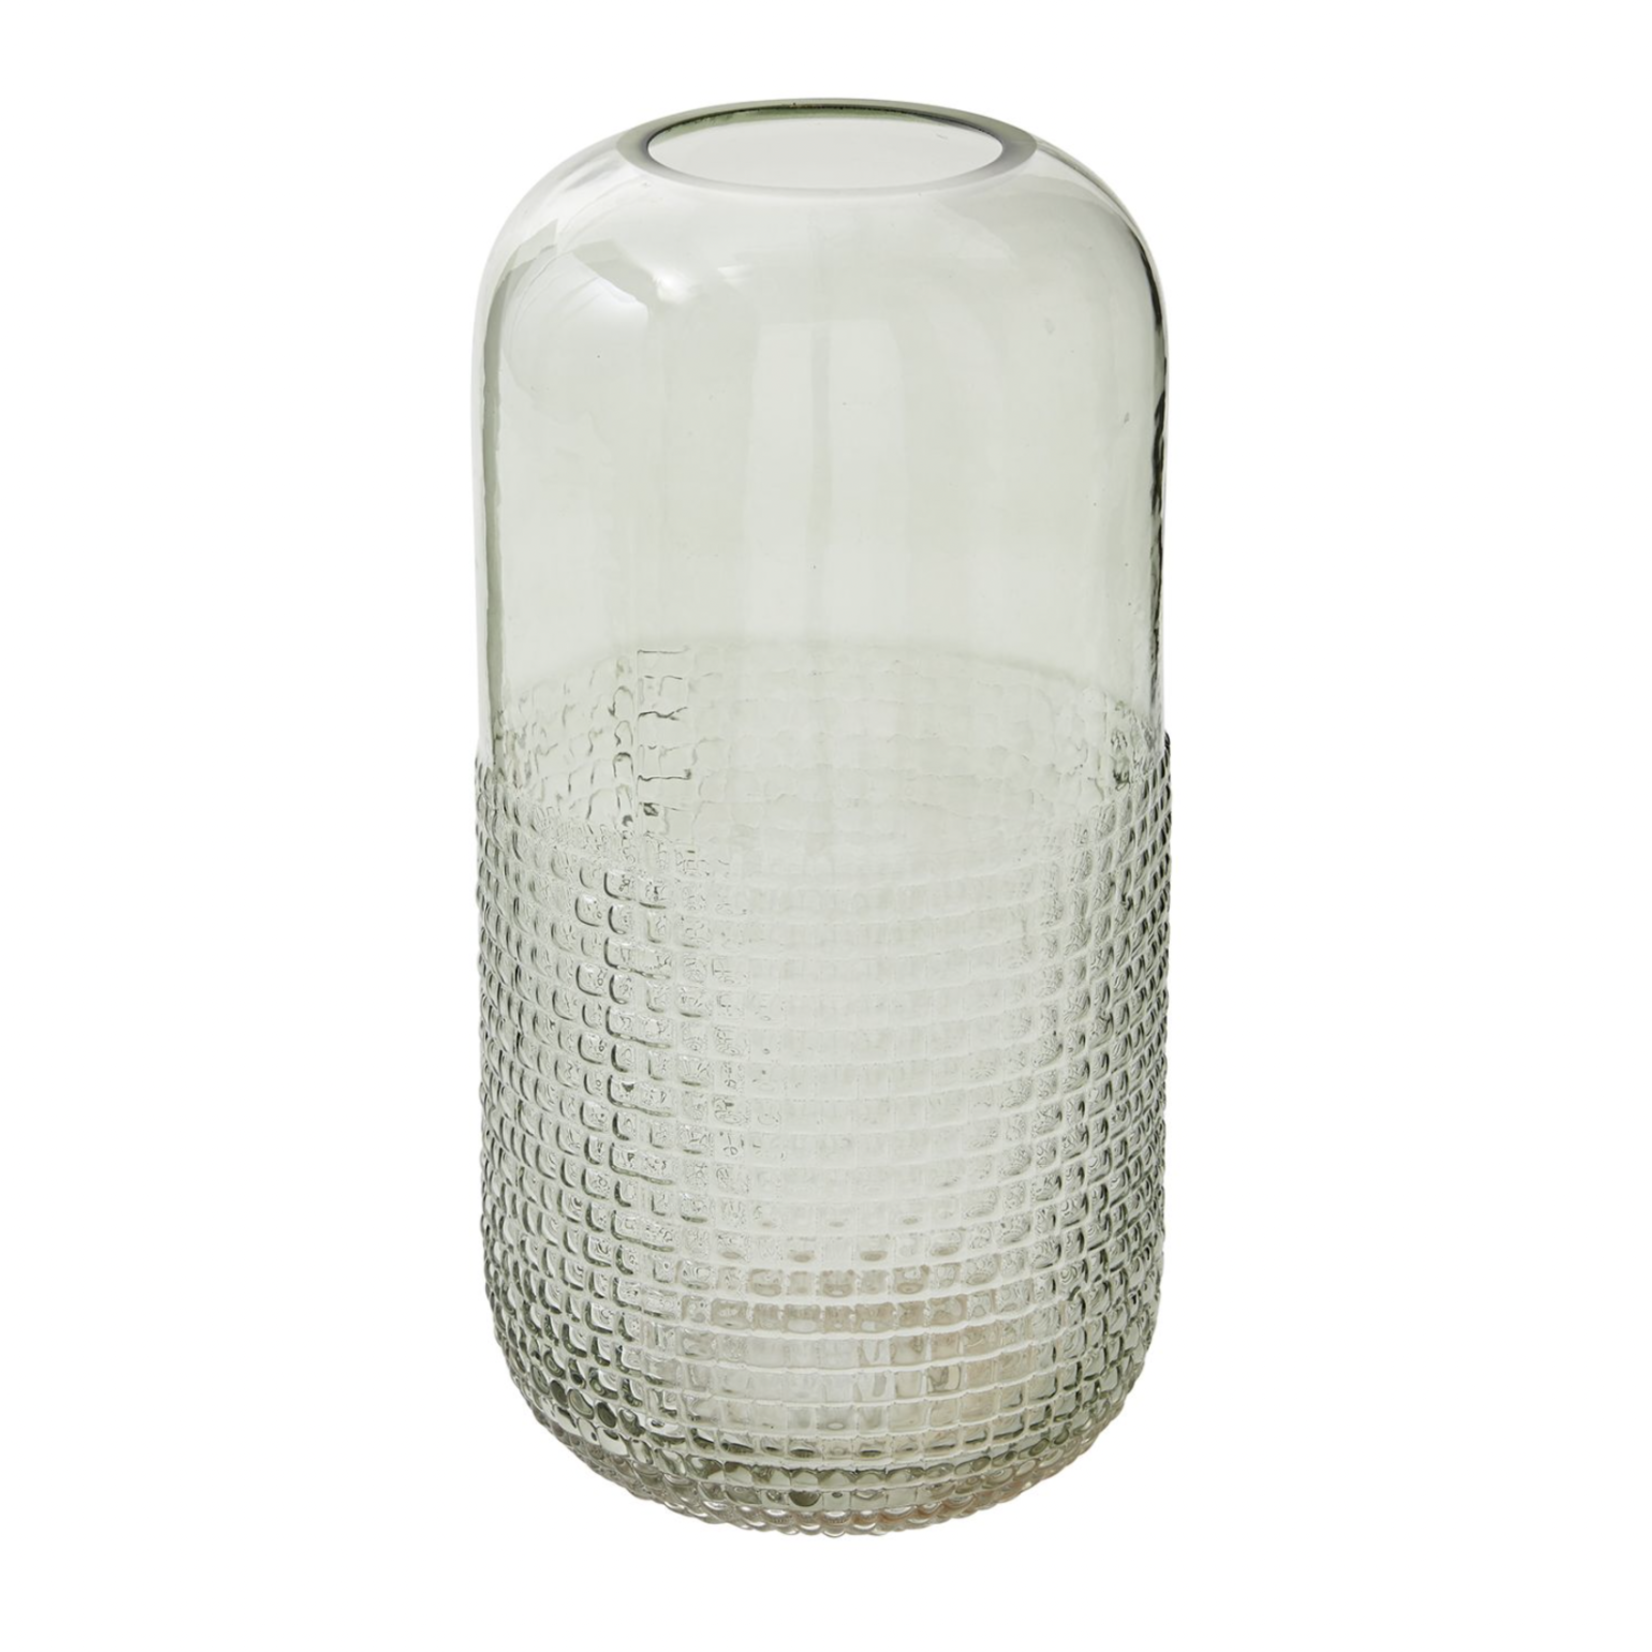 50% off was $21 now $10.50, 12”H X 6.25” CLEREL GLASS VASE (AD)